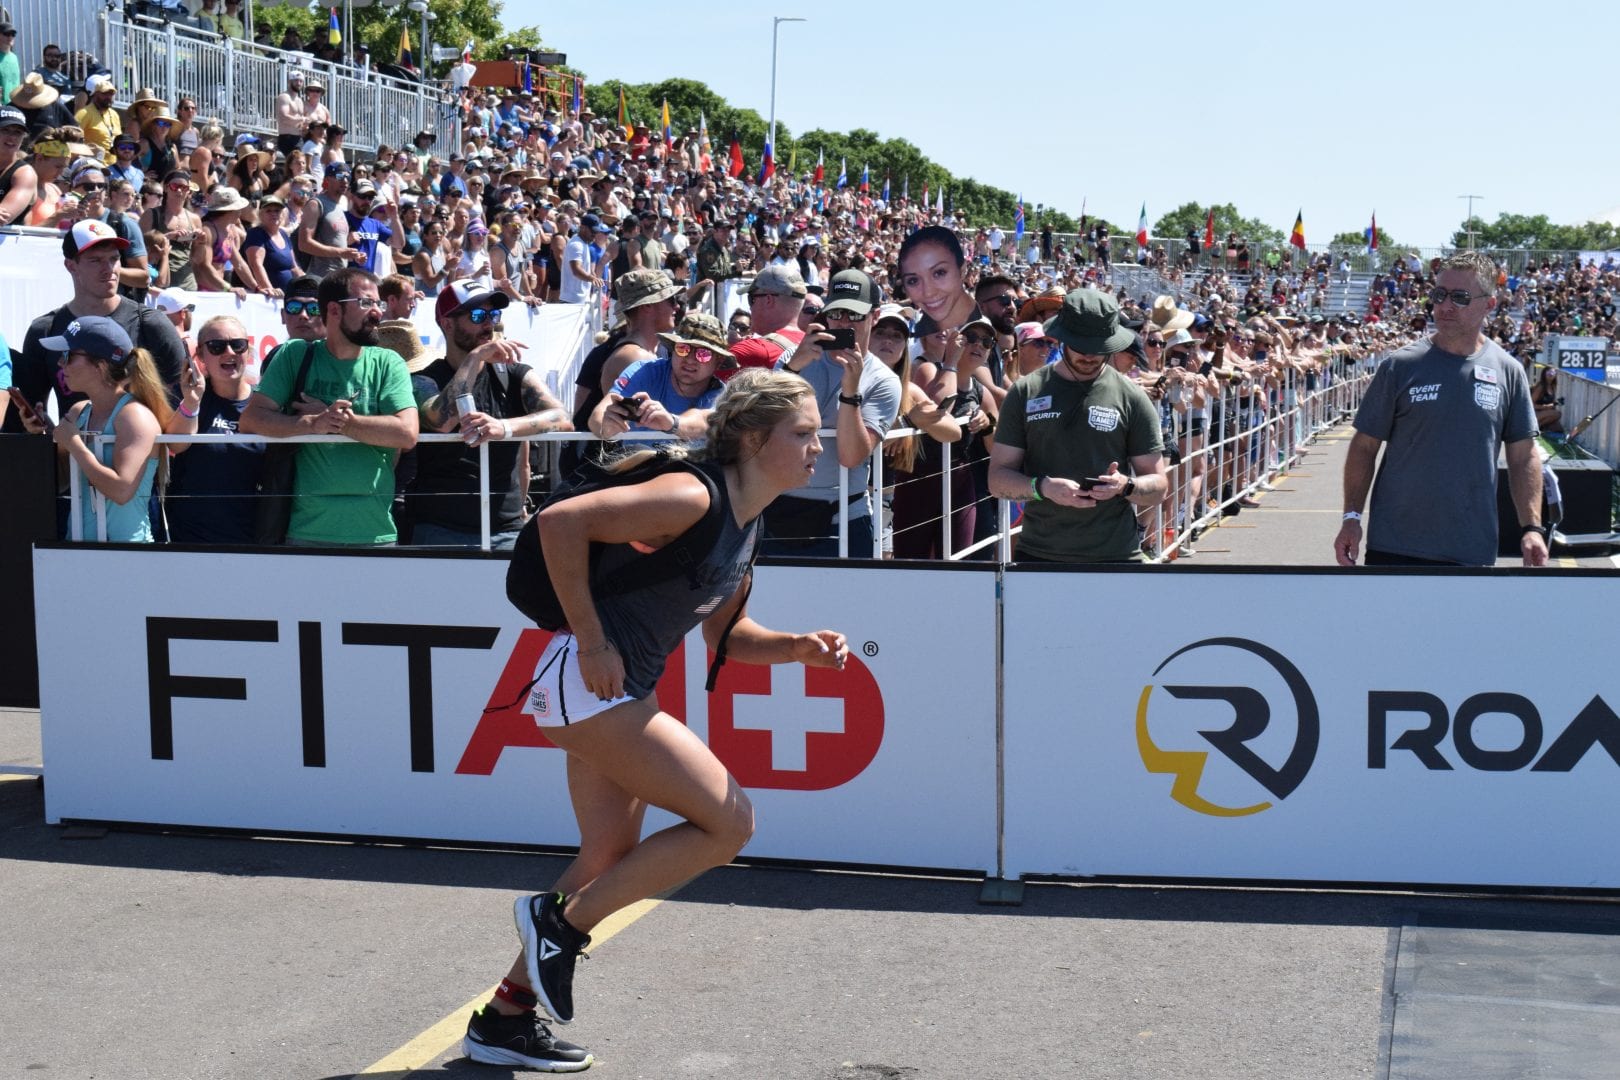 Haley Adams of CrossFit Mayhem completes the Ruck Run event at the 2019 CrossFit Games